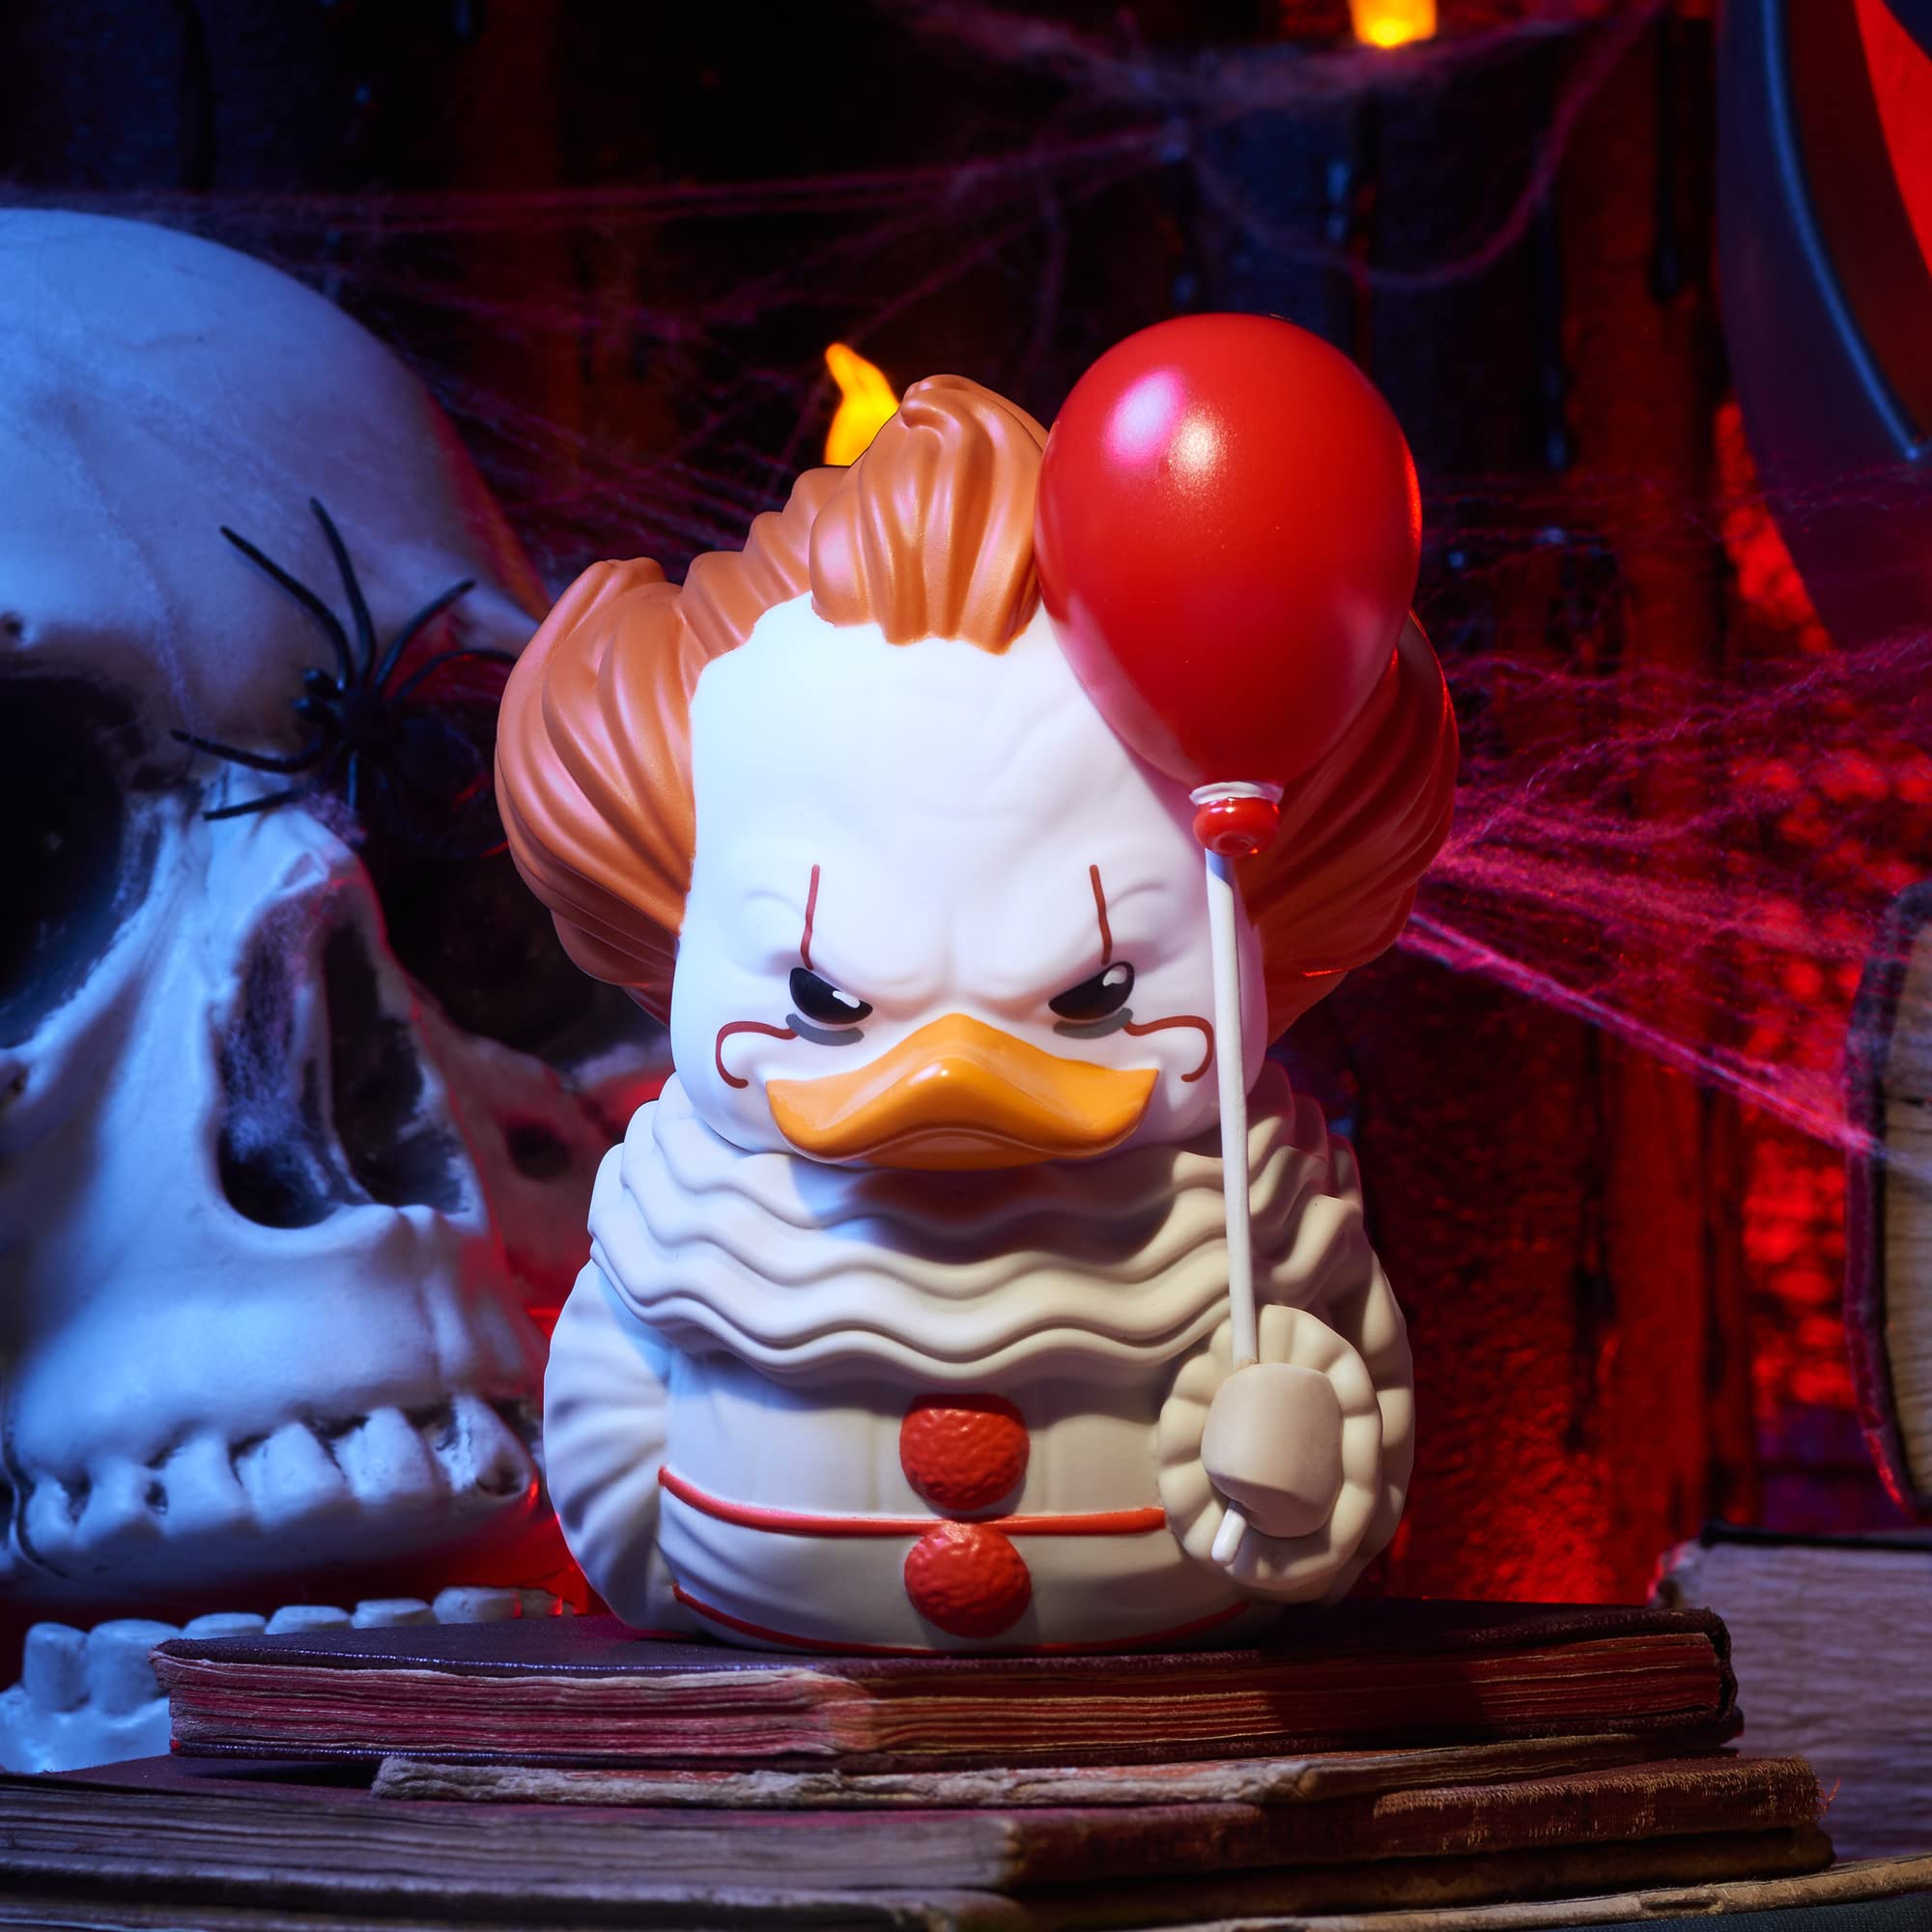 TUBBZ Boxed Edition Pennywise Collectible Vinyl Rubber Duck Figure - Official IT Merchandise - TV, Movies & Video Games